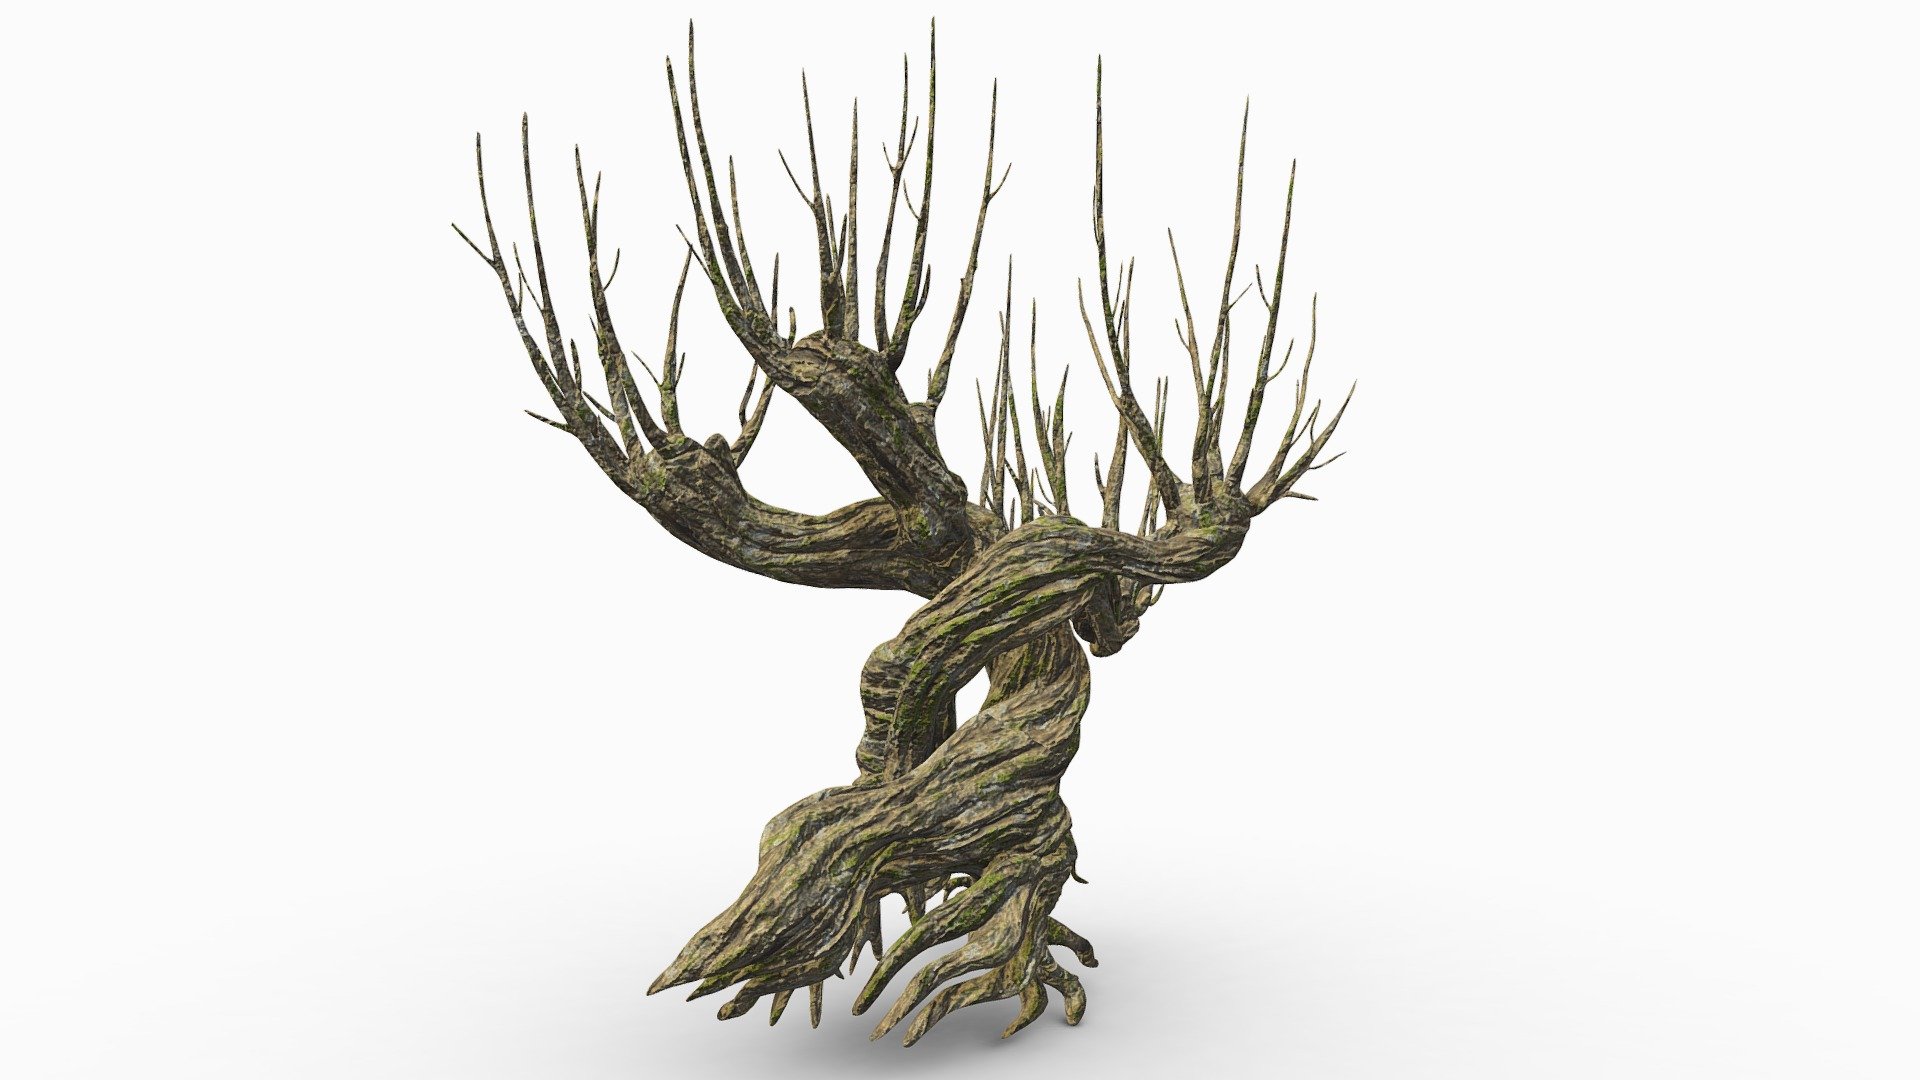 Whomping Willow

WhompingWillow_v2.ZPR is the main project file. 3D modeling, Retopology and UV unwrap were made here. UV map 2048x2048 was flipped U and V.

WhompingWillow.MB has the aiStandardSurface with base color, roughness and normal associated. The project file contains an HDRI and a Render set 1K square, PNG. Project file was set to &ldquo;Textures